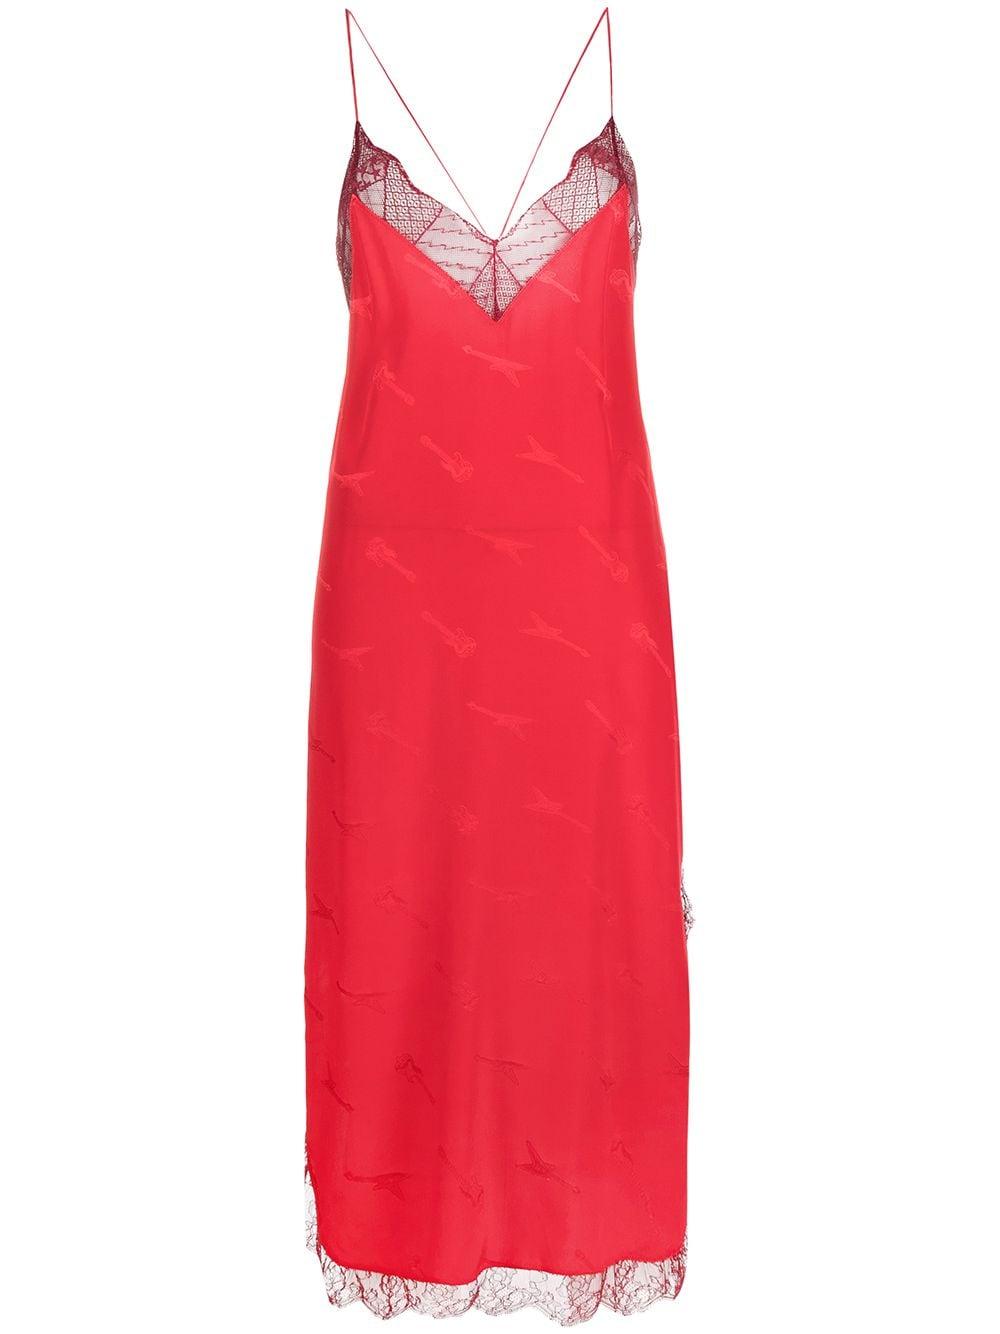 Zadig & Voltaire Risty Guitar Pattern Dress in Red | Lyst